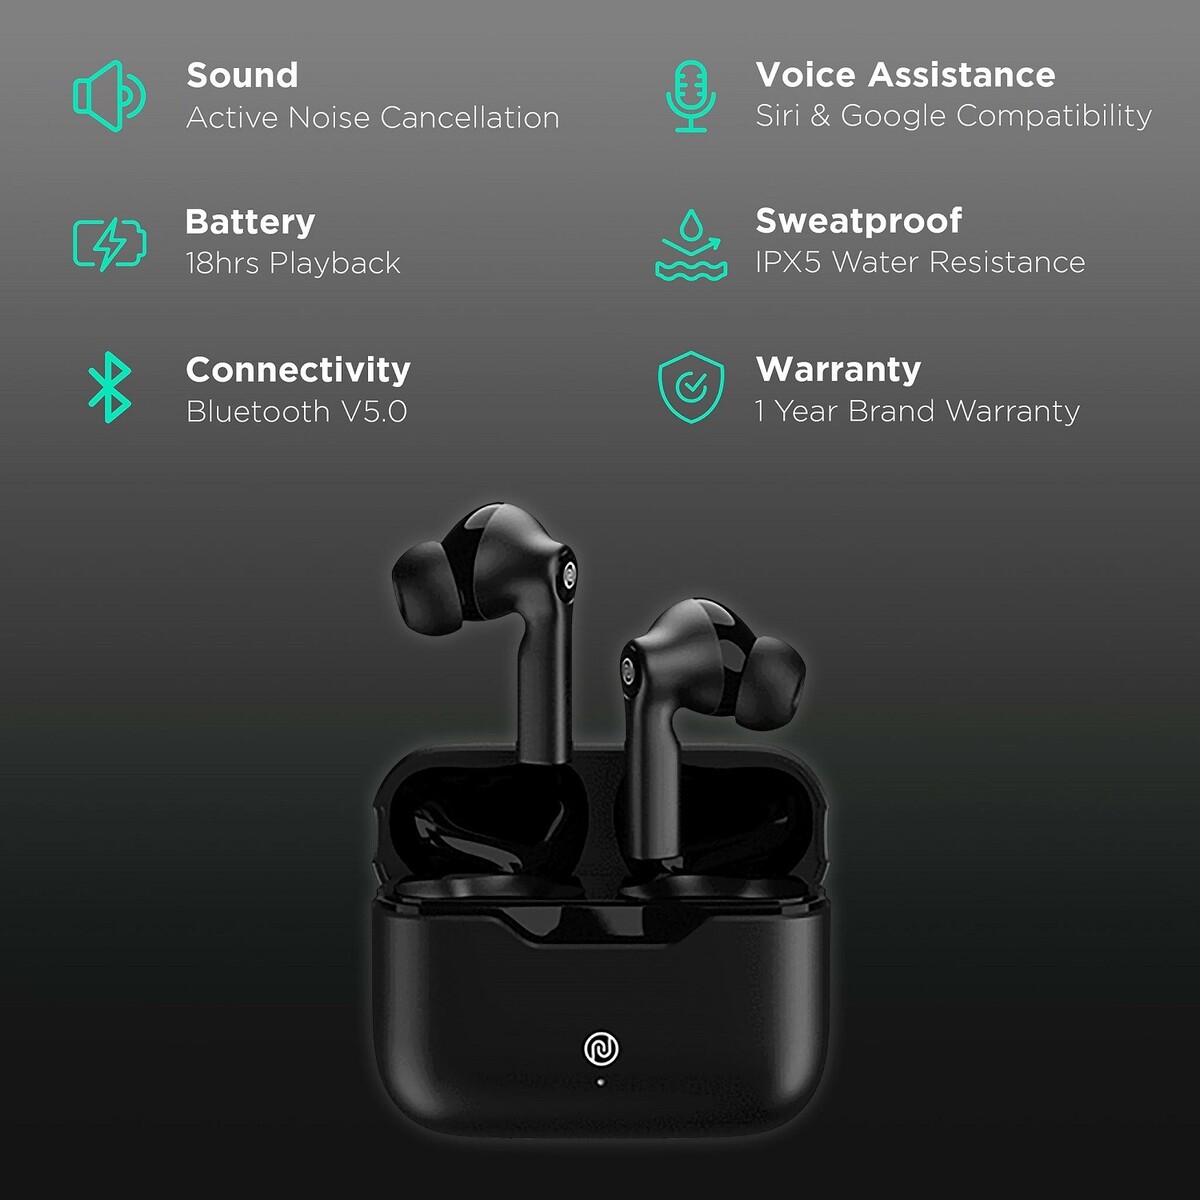 Noise Buds Smart Truly Wireless Bluetooth Earbuds with Hyper Sync technology, IPX5 water resistance, Full touch controls  Black